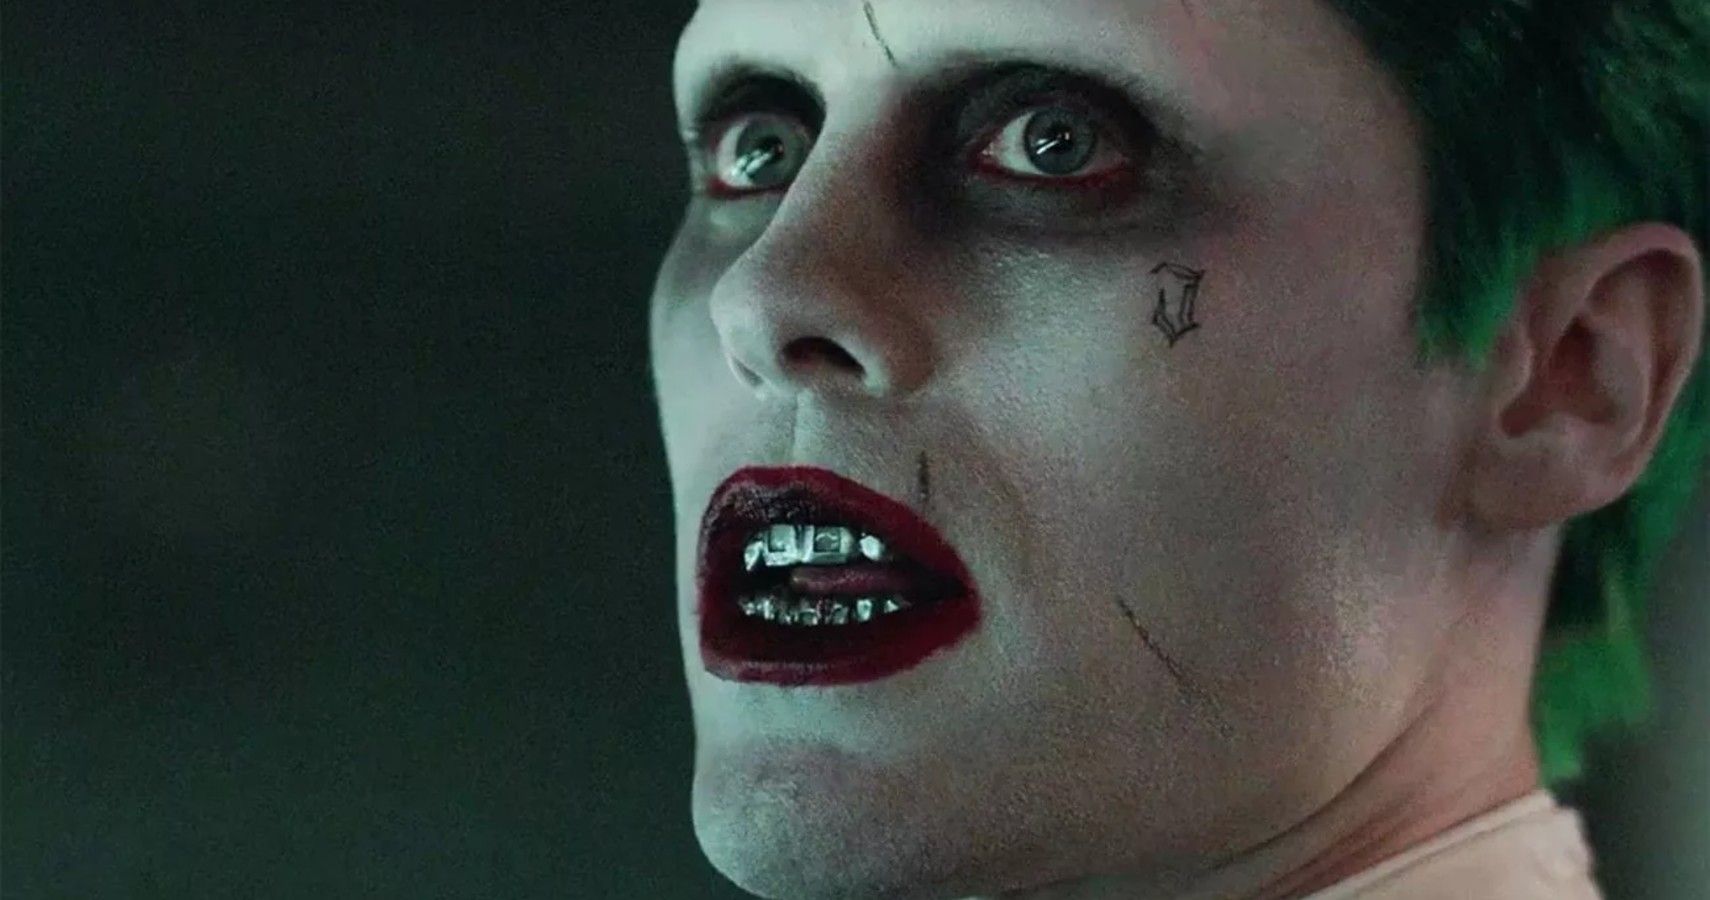 We should feel sorry for Jared Leto. His Joker never had a chance, Joker